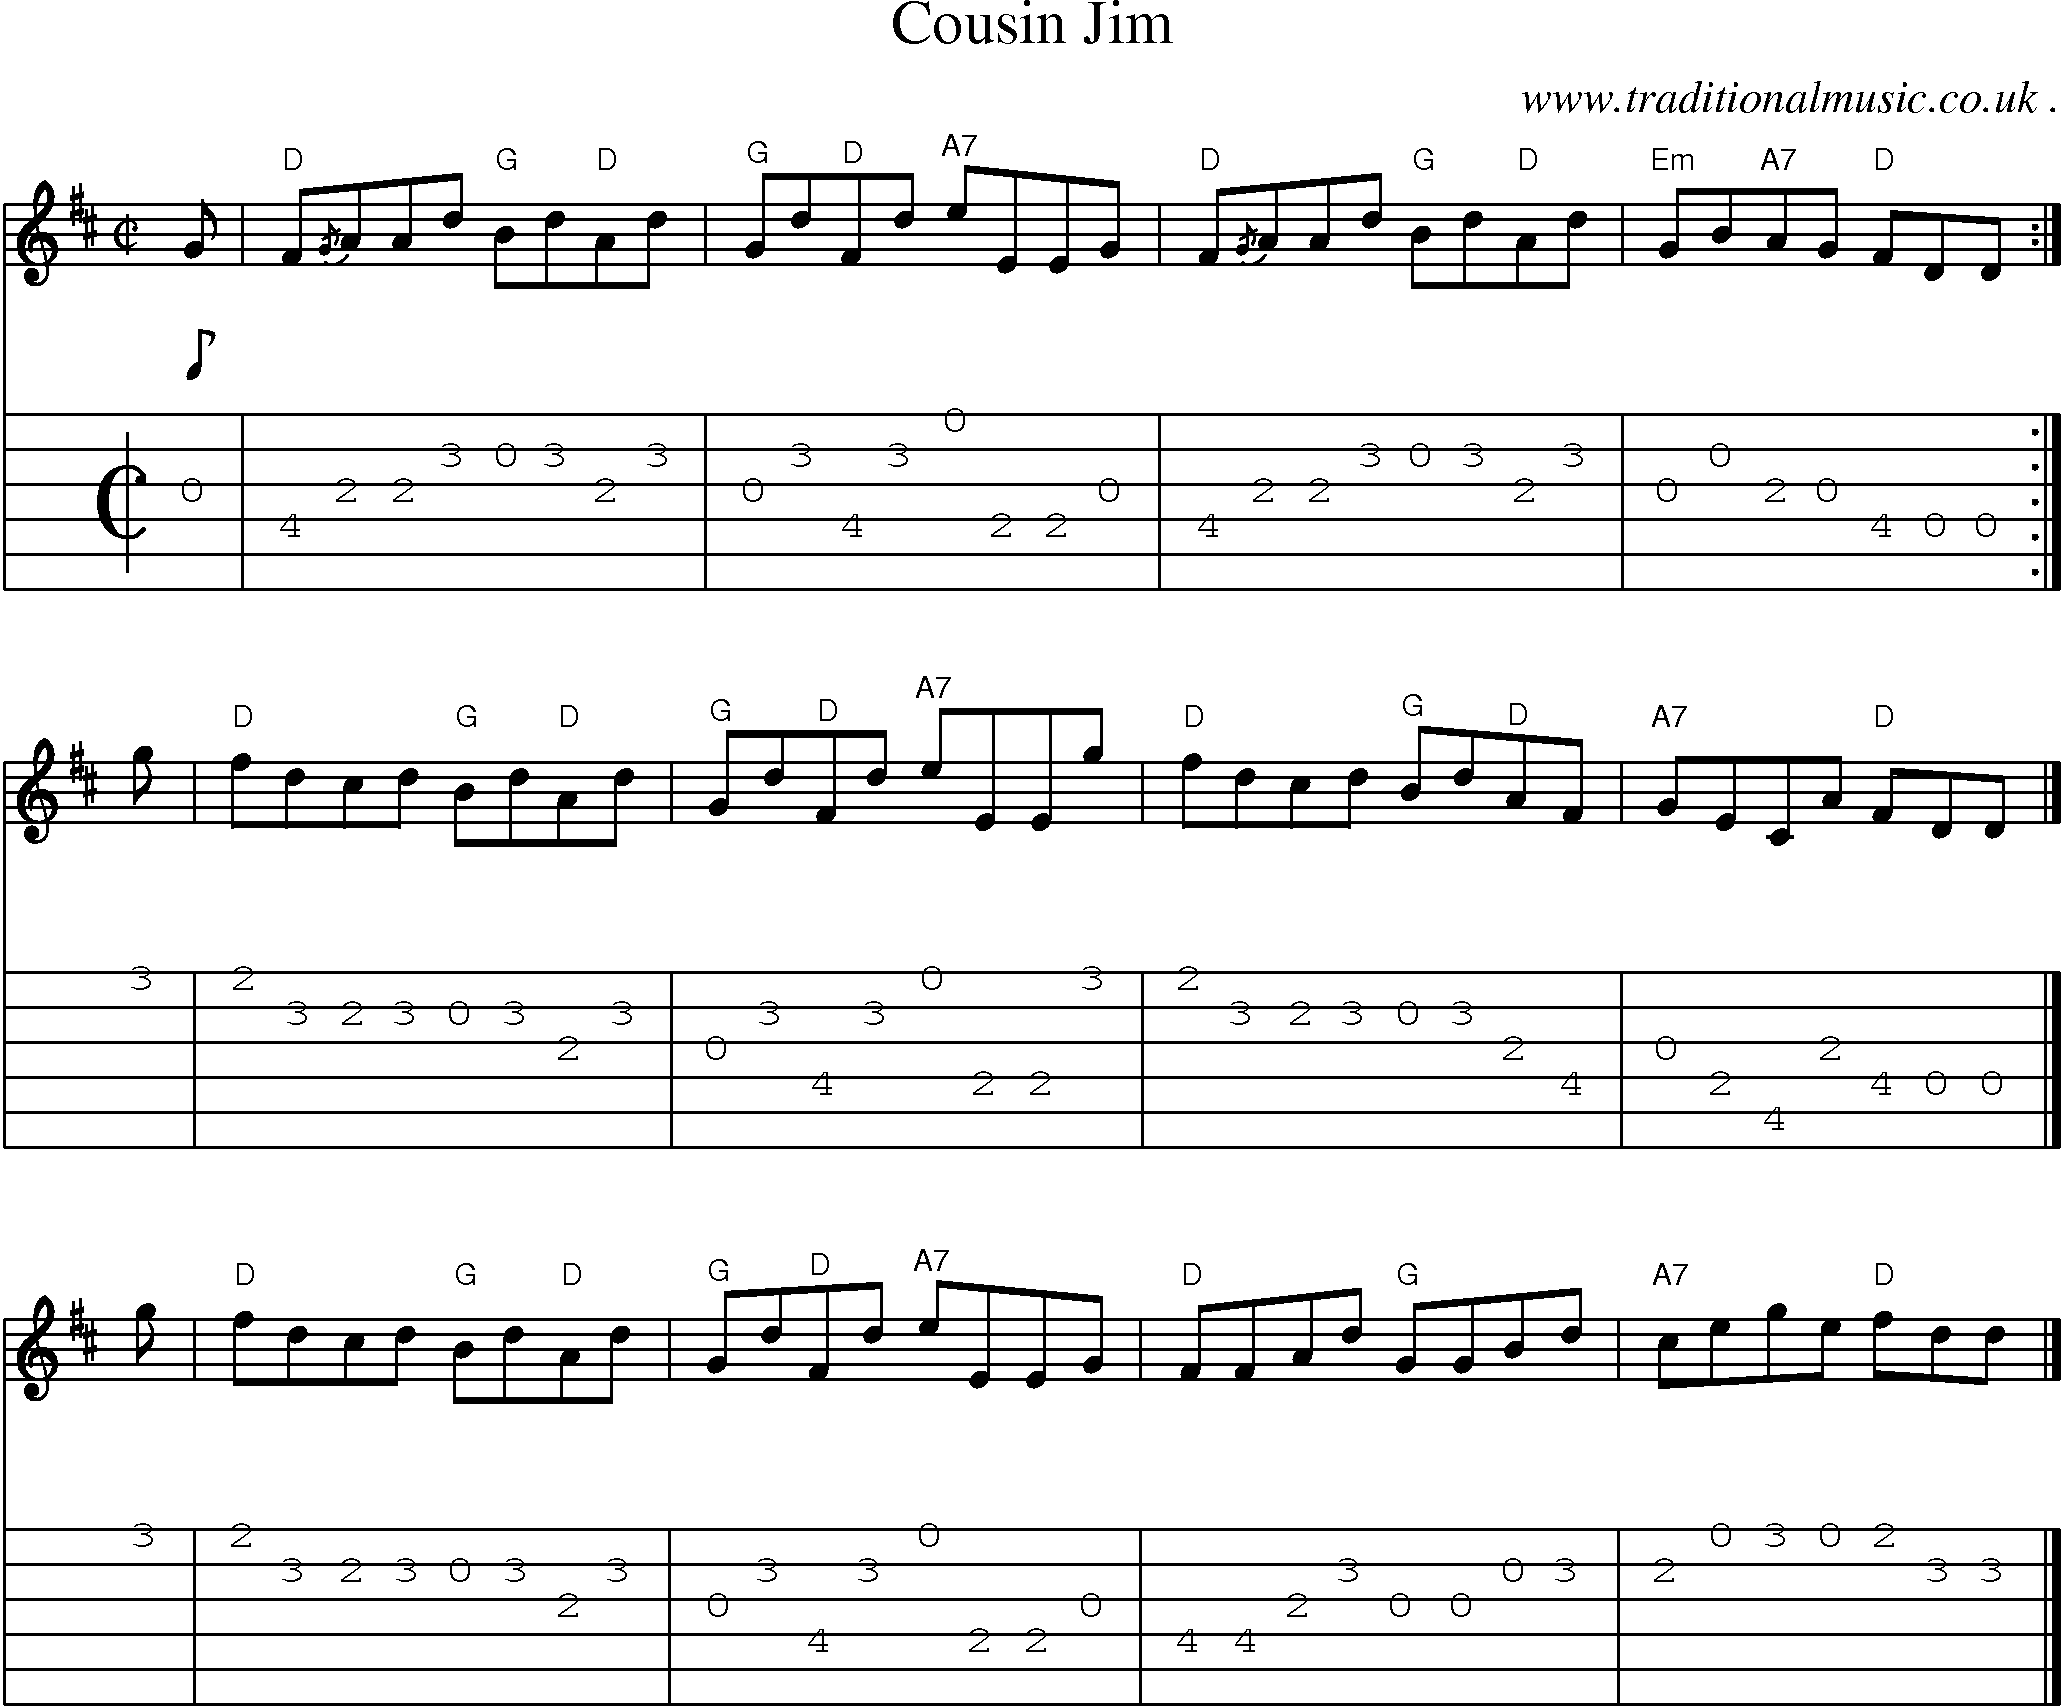 Sheet-music  score, Chords and Guitar Tabs for Cousin Jim